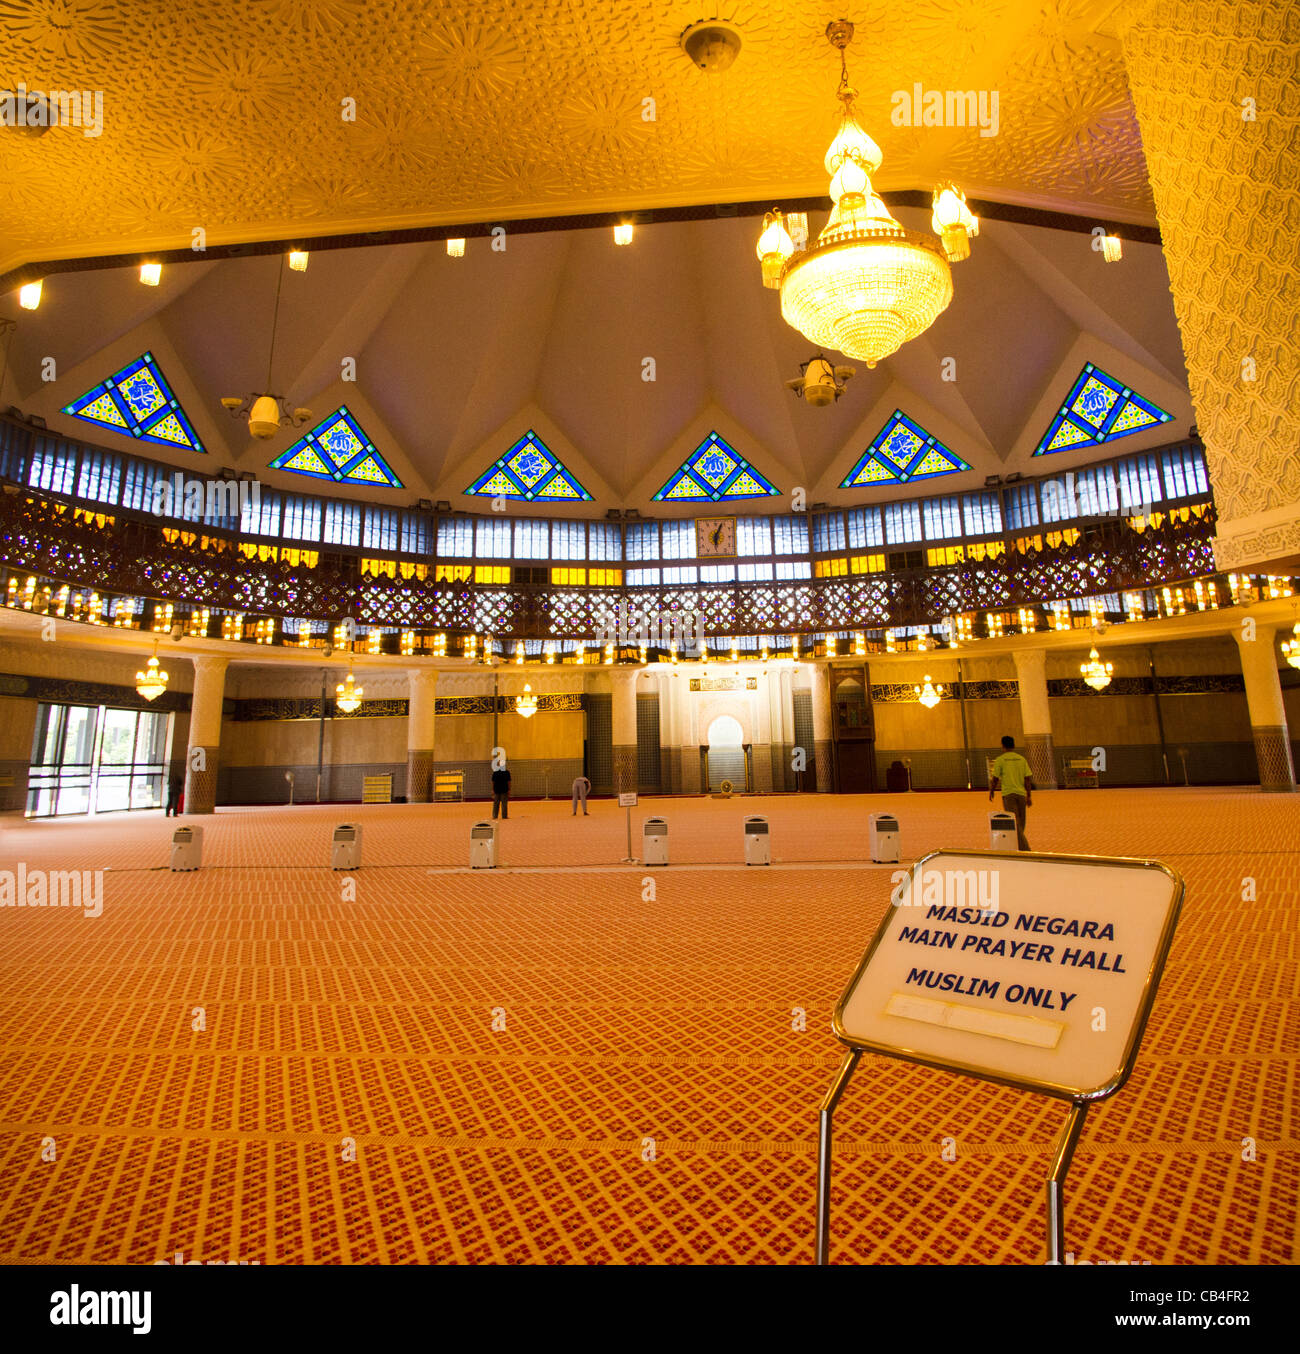 interiors of national mosque, masjib negara, of Malaysia, with a 'muslim only' display. Stock Photo